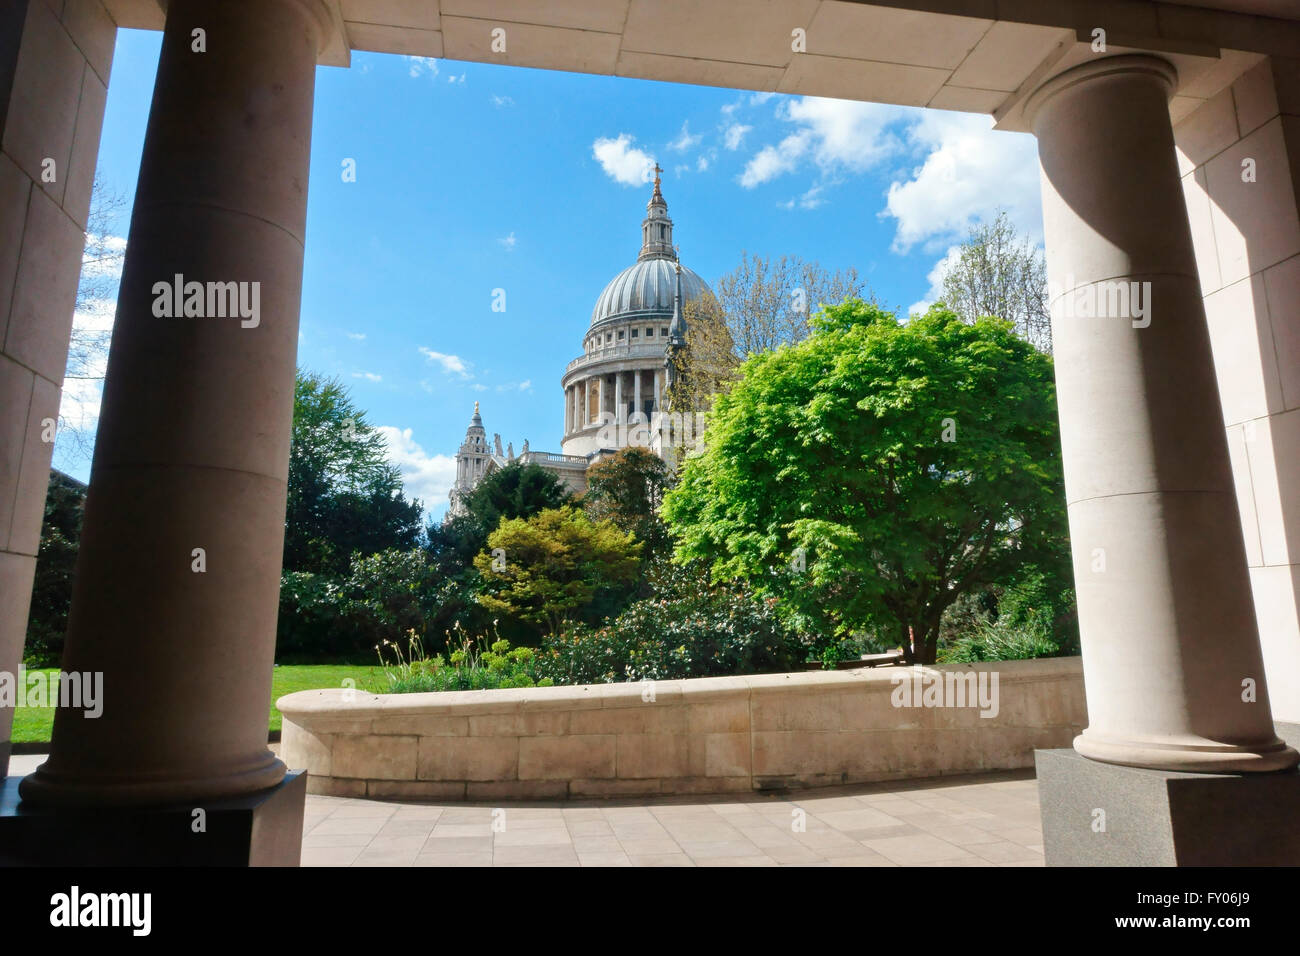 St Paul's Cathedral, City of London, England, Great Britain, GB, UK Stock Photo